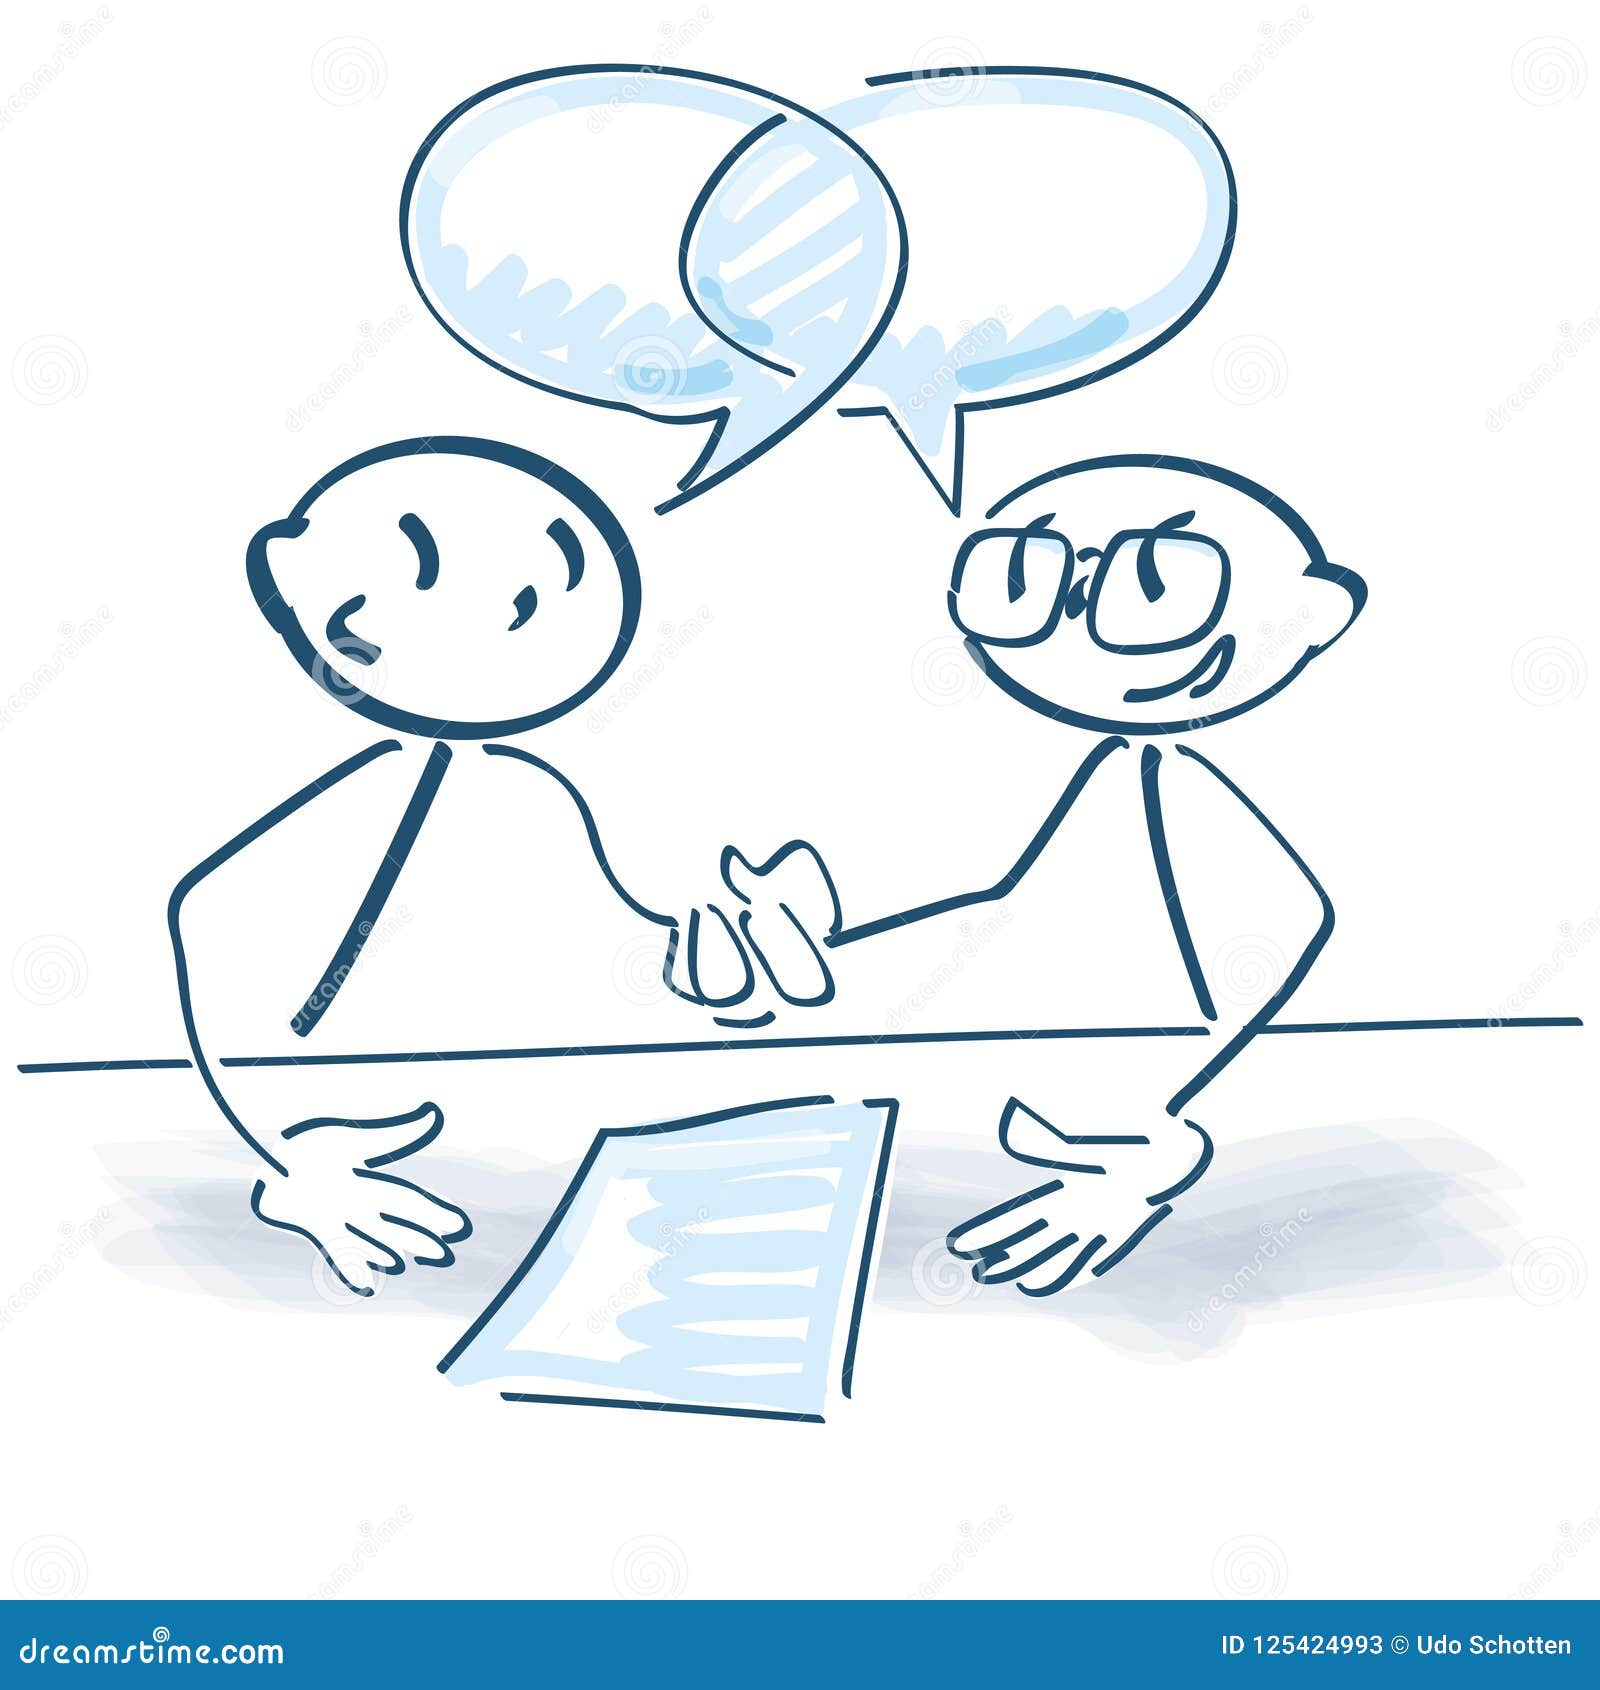 stick figures shaking hands after a consultation